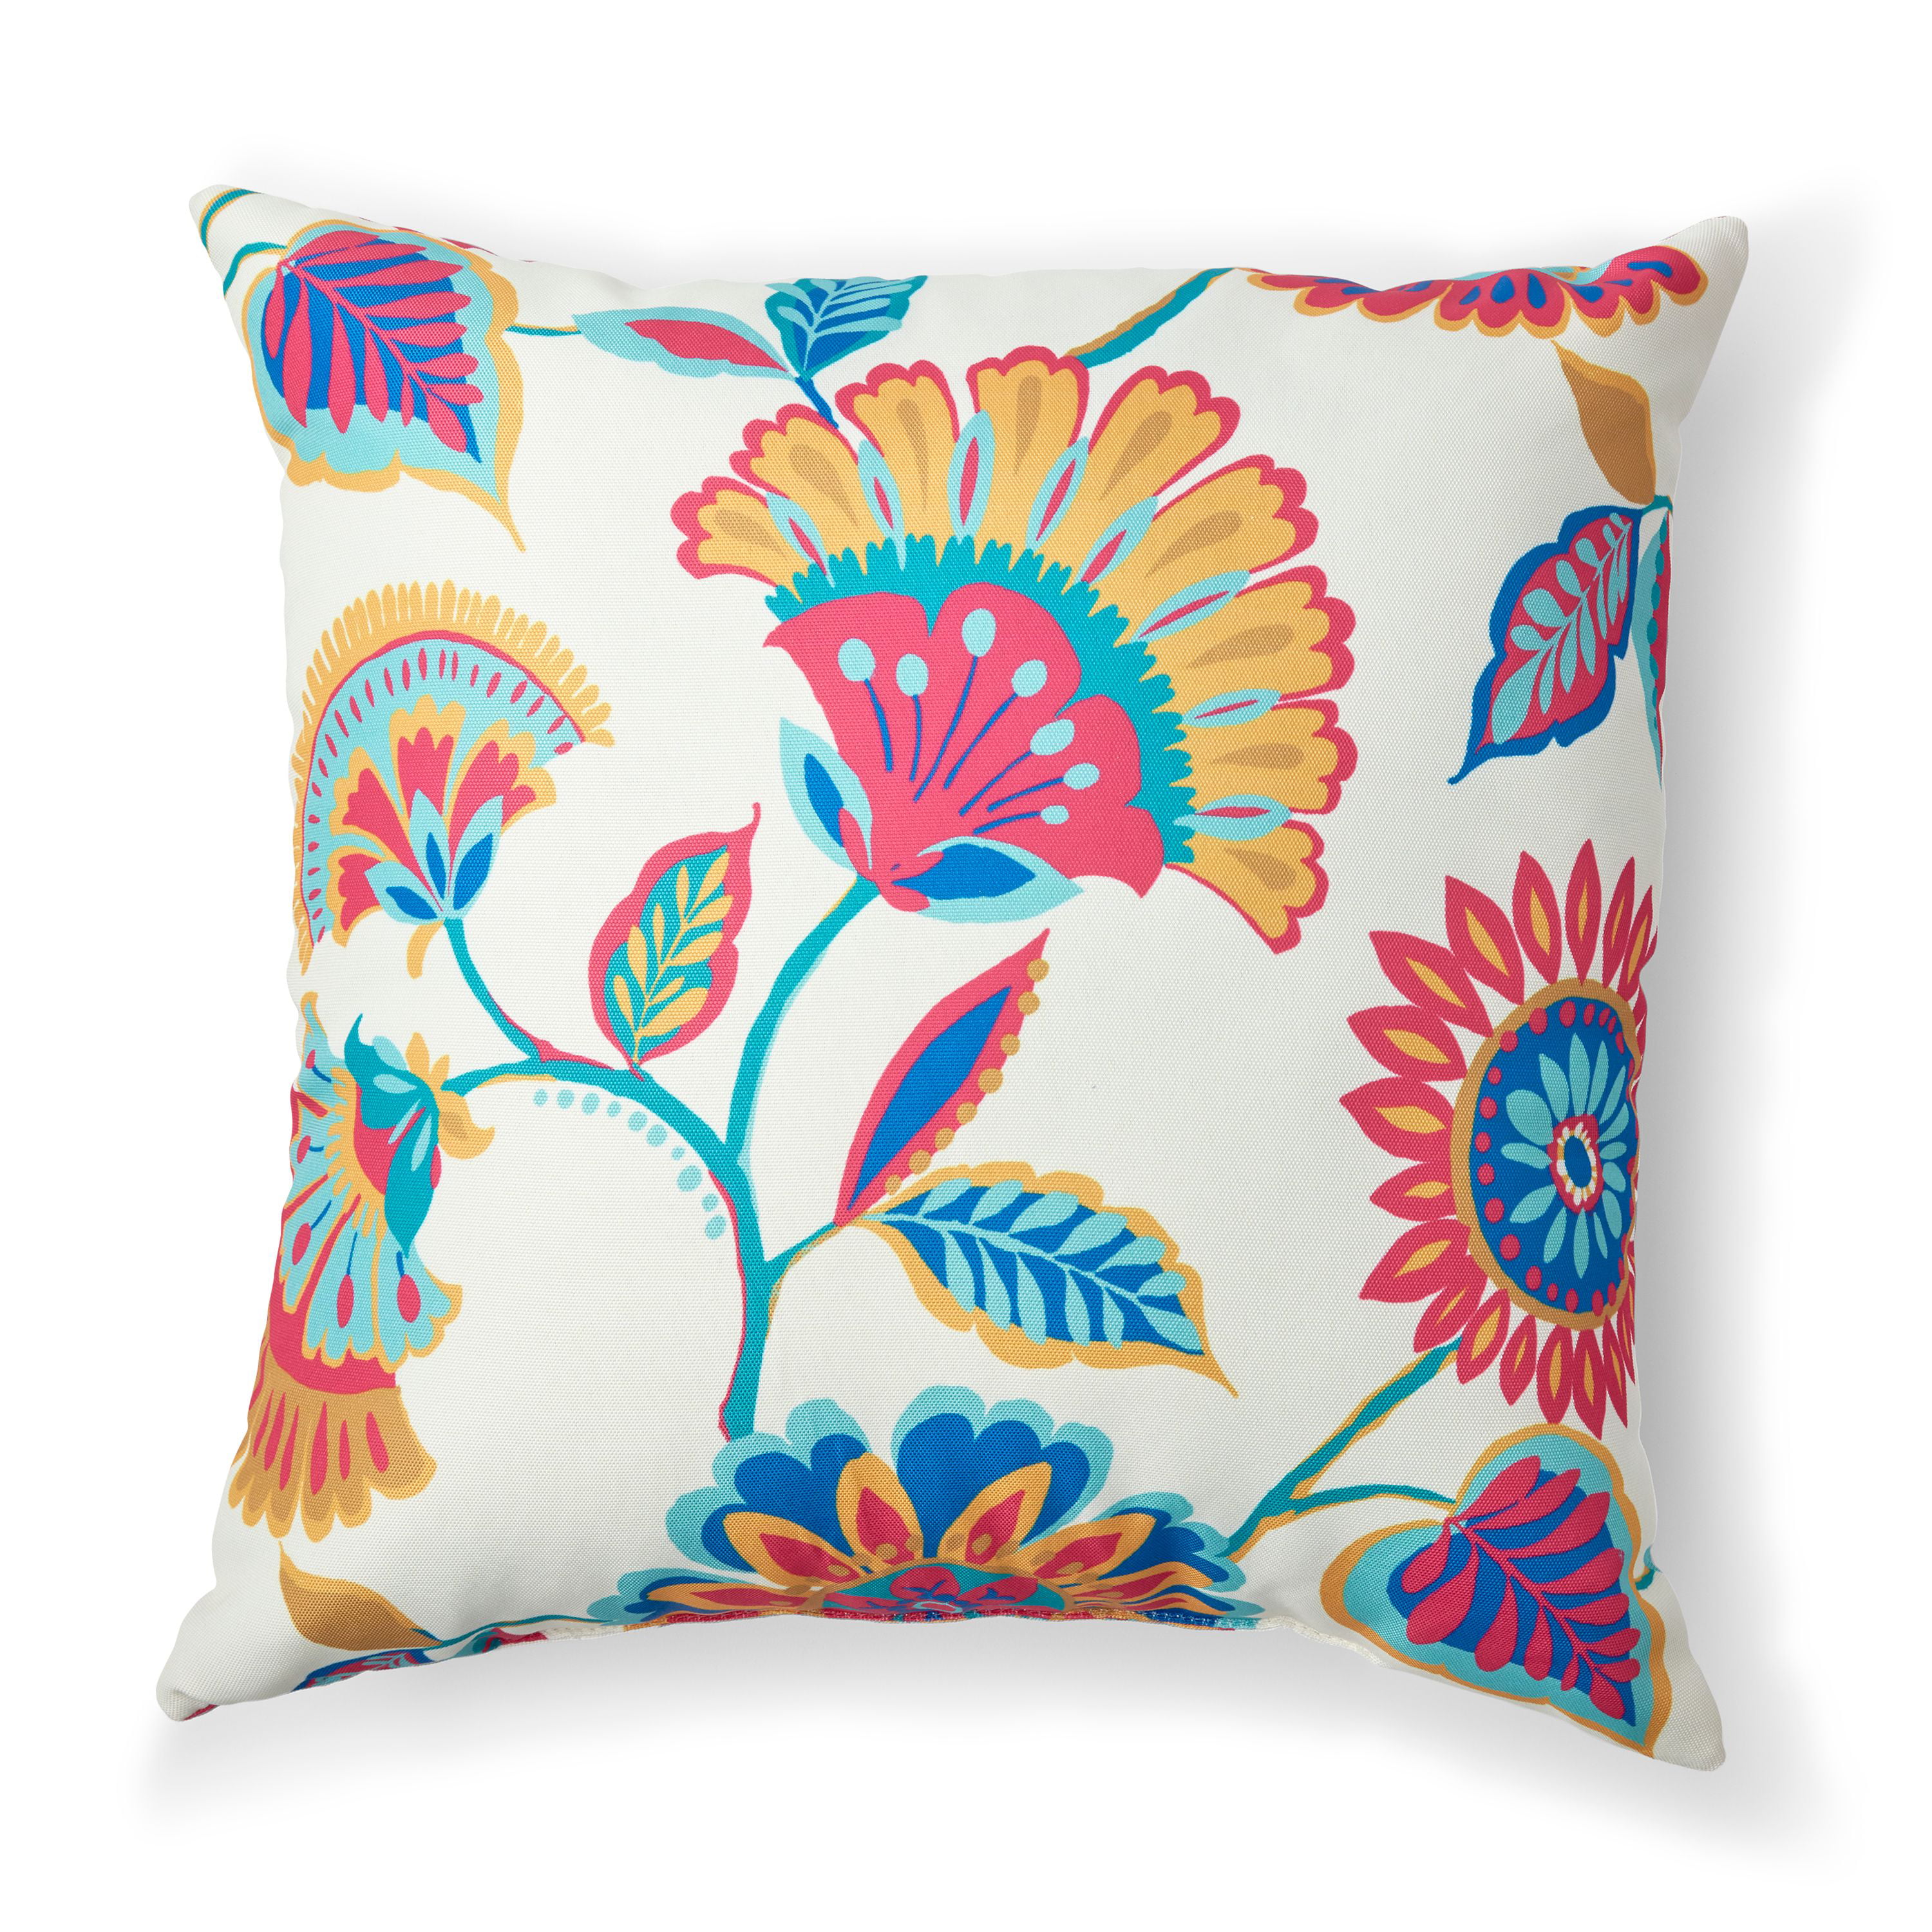 Mainstays Colorful Floral Decorative Throw Pillow, 18